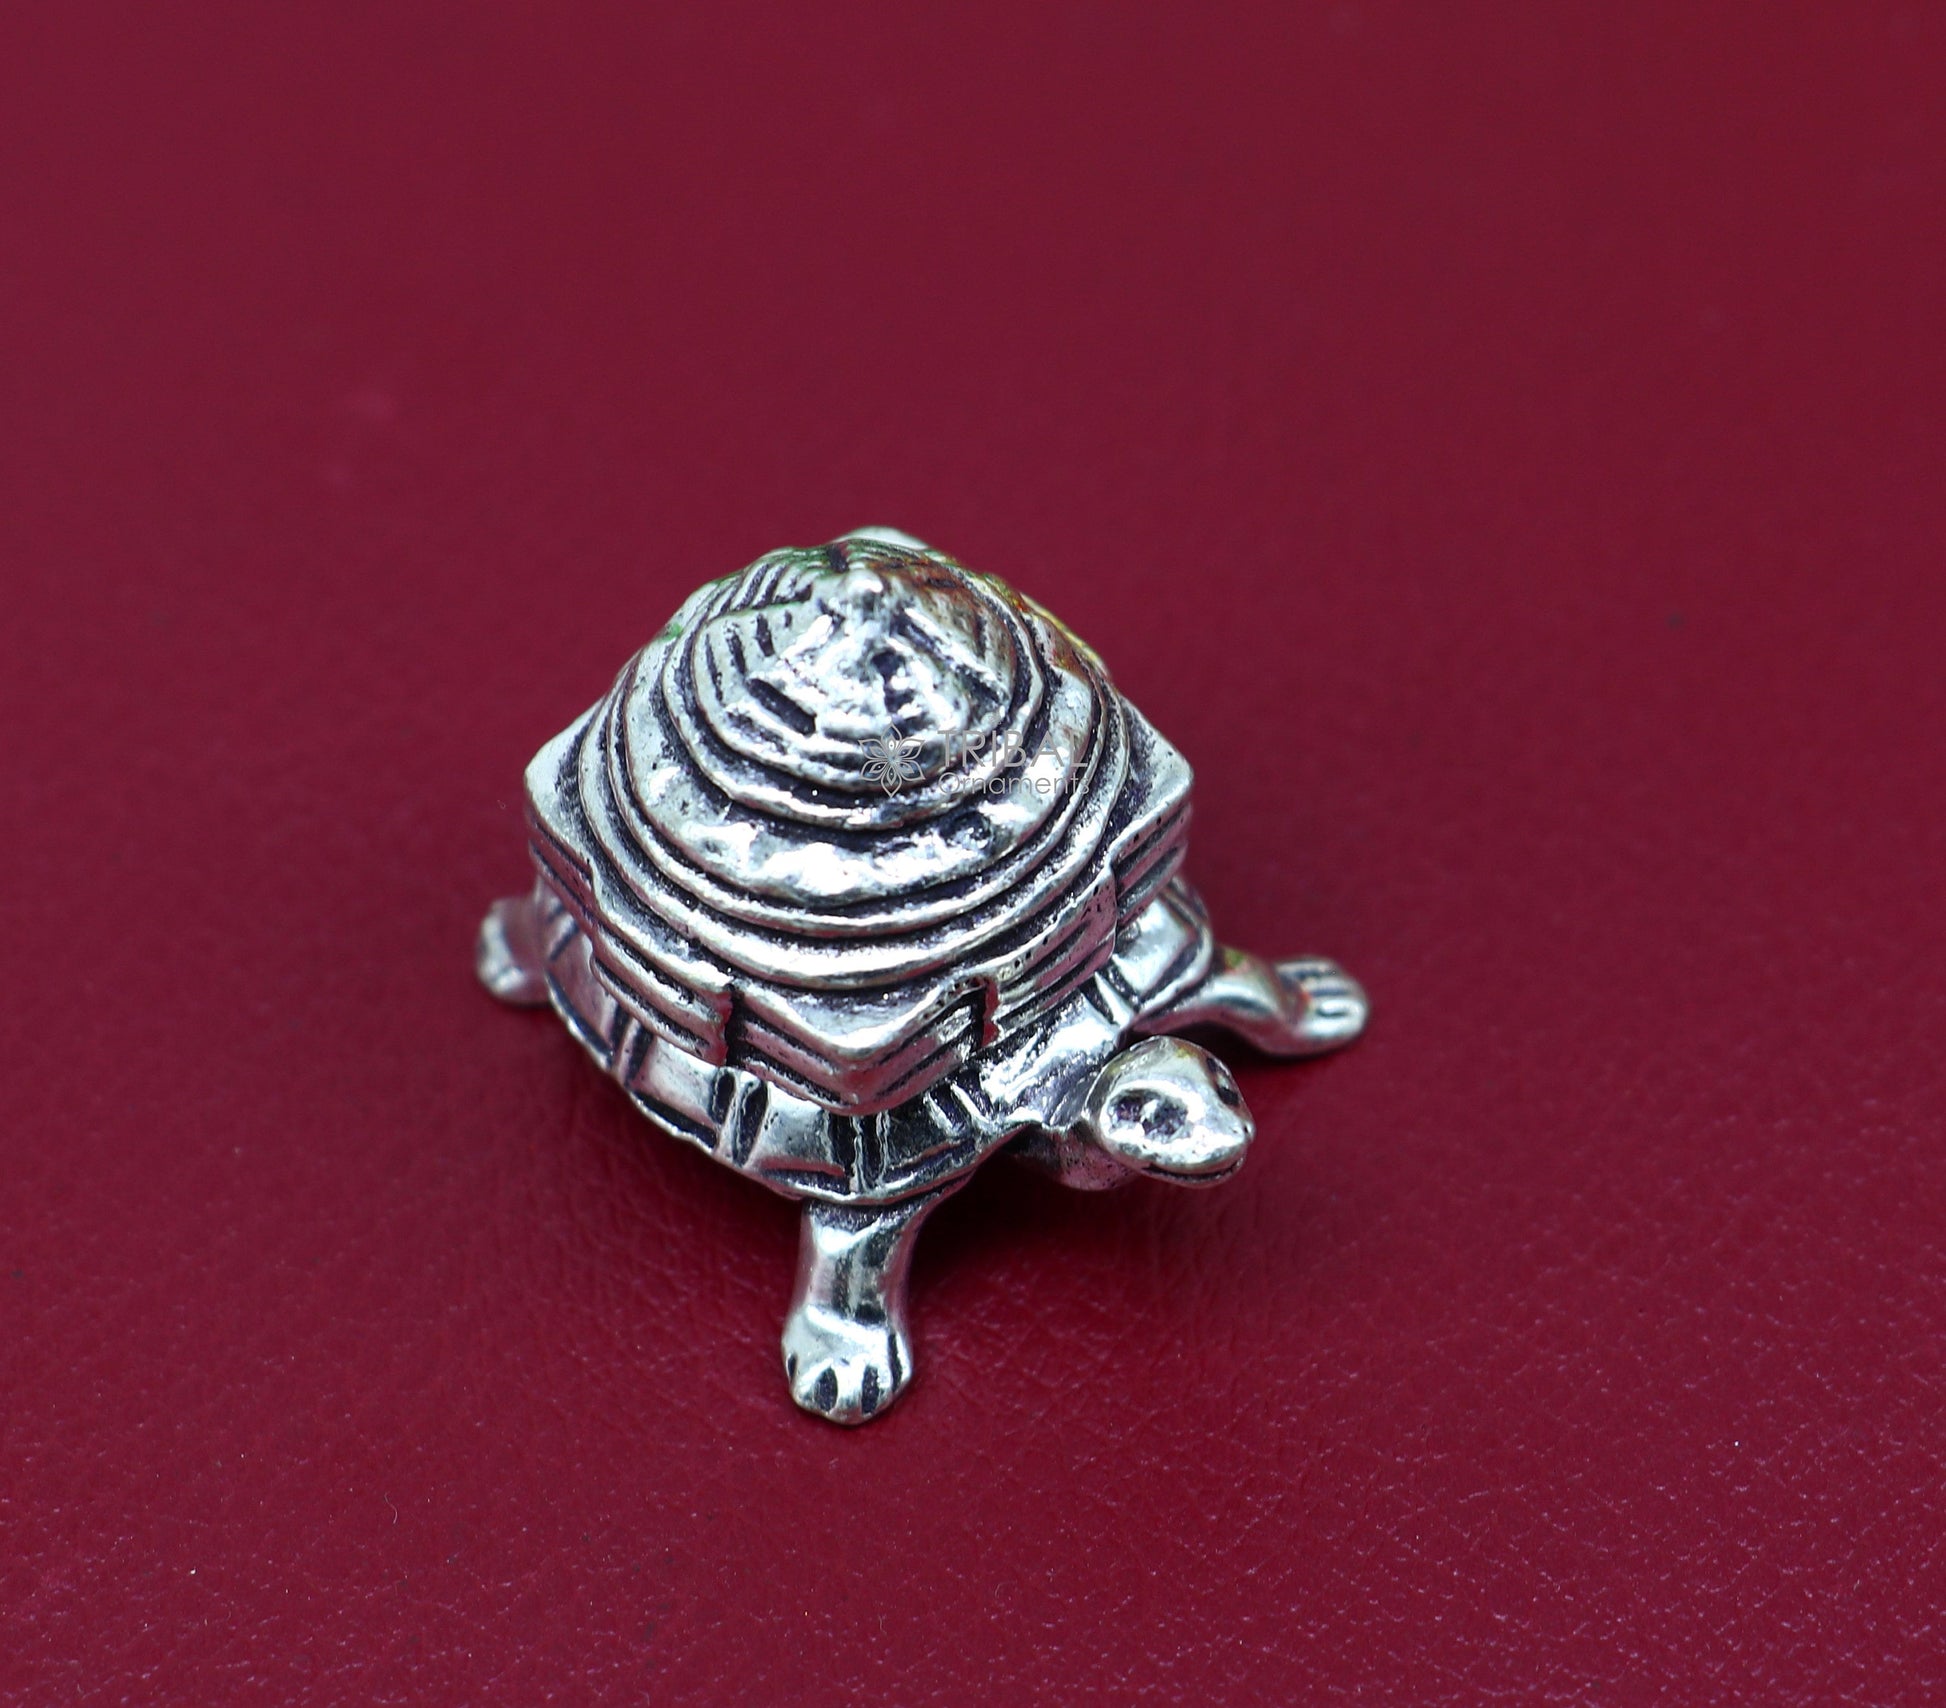 925 silver vintage design small tortoise statue sculpture with shree yantram pyramid  best puja article collection silver figurine art612 - TRIBAL ORNAMENTS